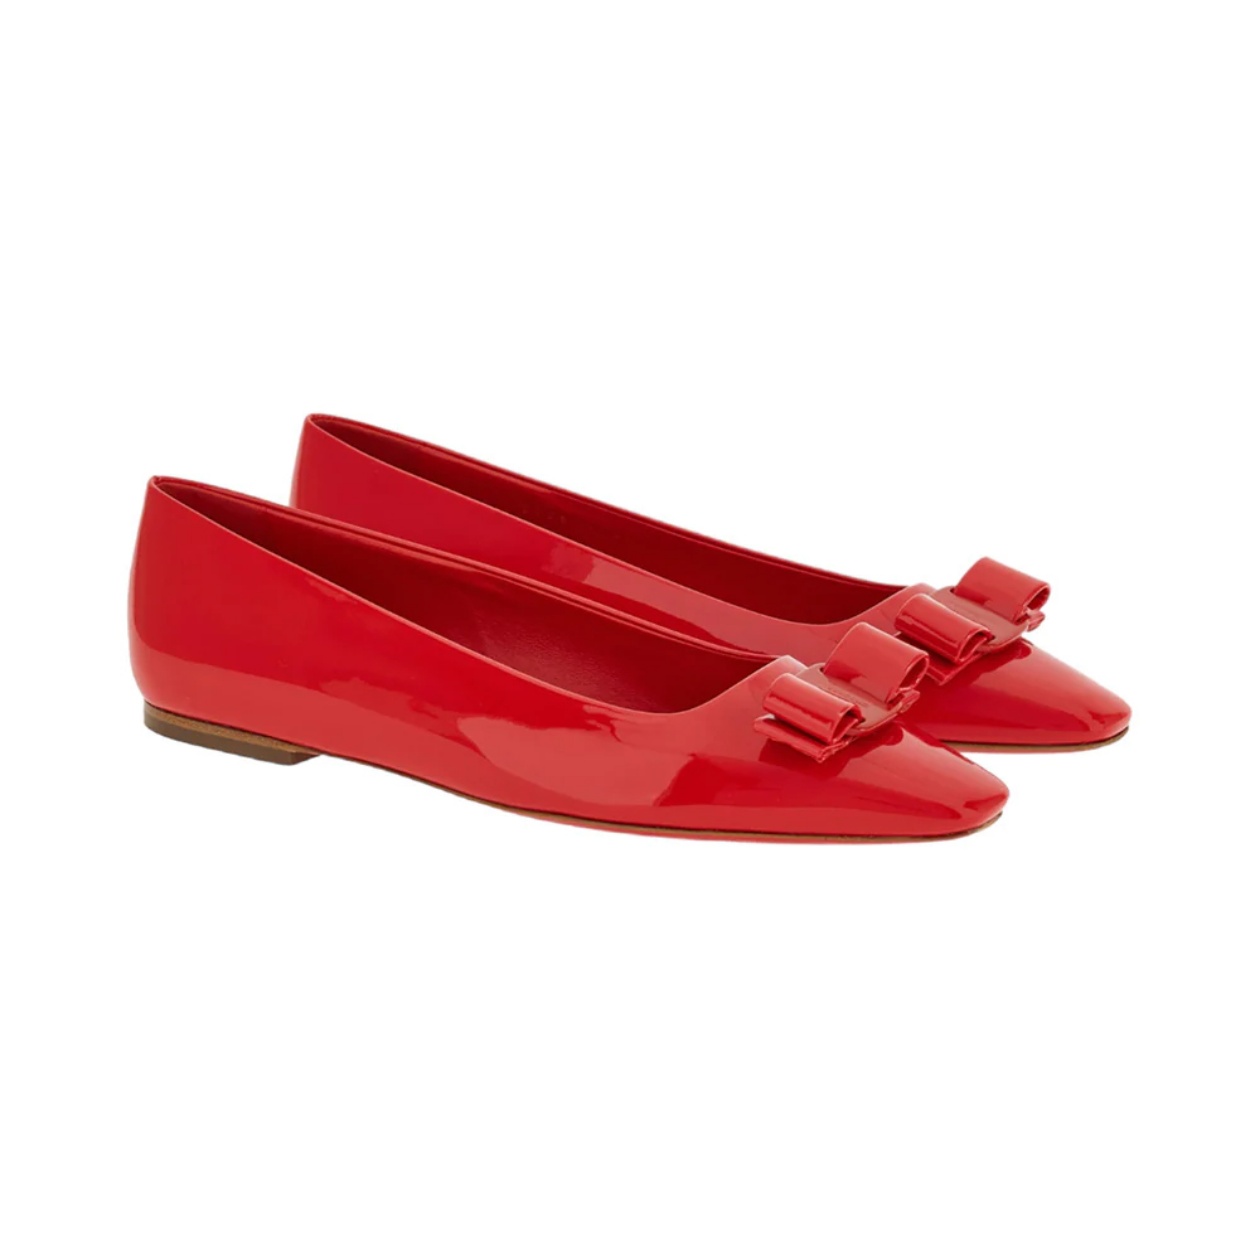 Salvatore Ferragamo Vara Bow Flats Patent Leather Flame Red